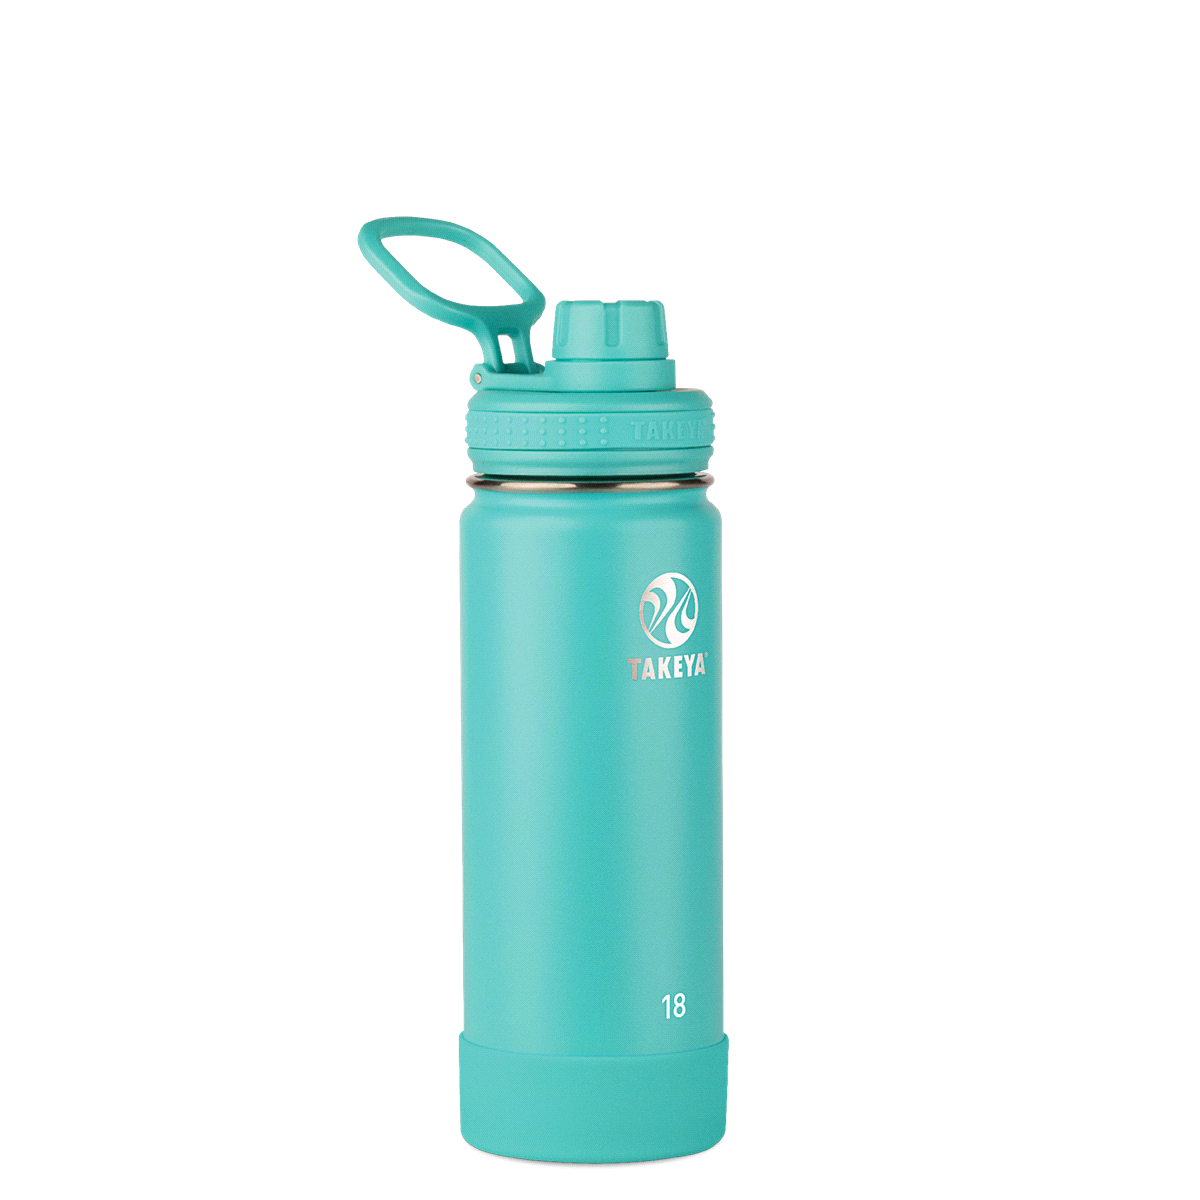 slide 1 of 1, Takeya Actives Insulated Stainless Steel Water Bottle With Insulated Spout Lid - Teal Blue, 18 oz